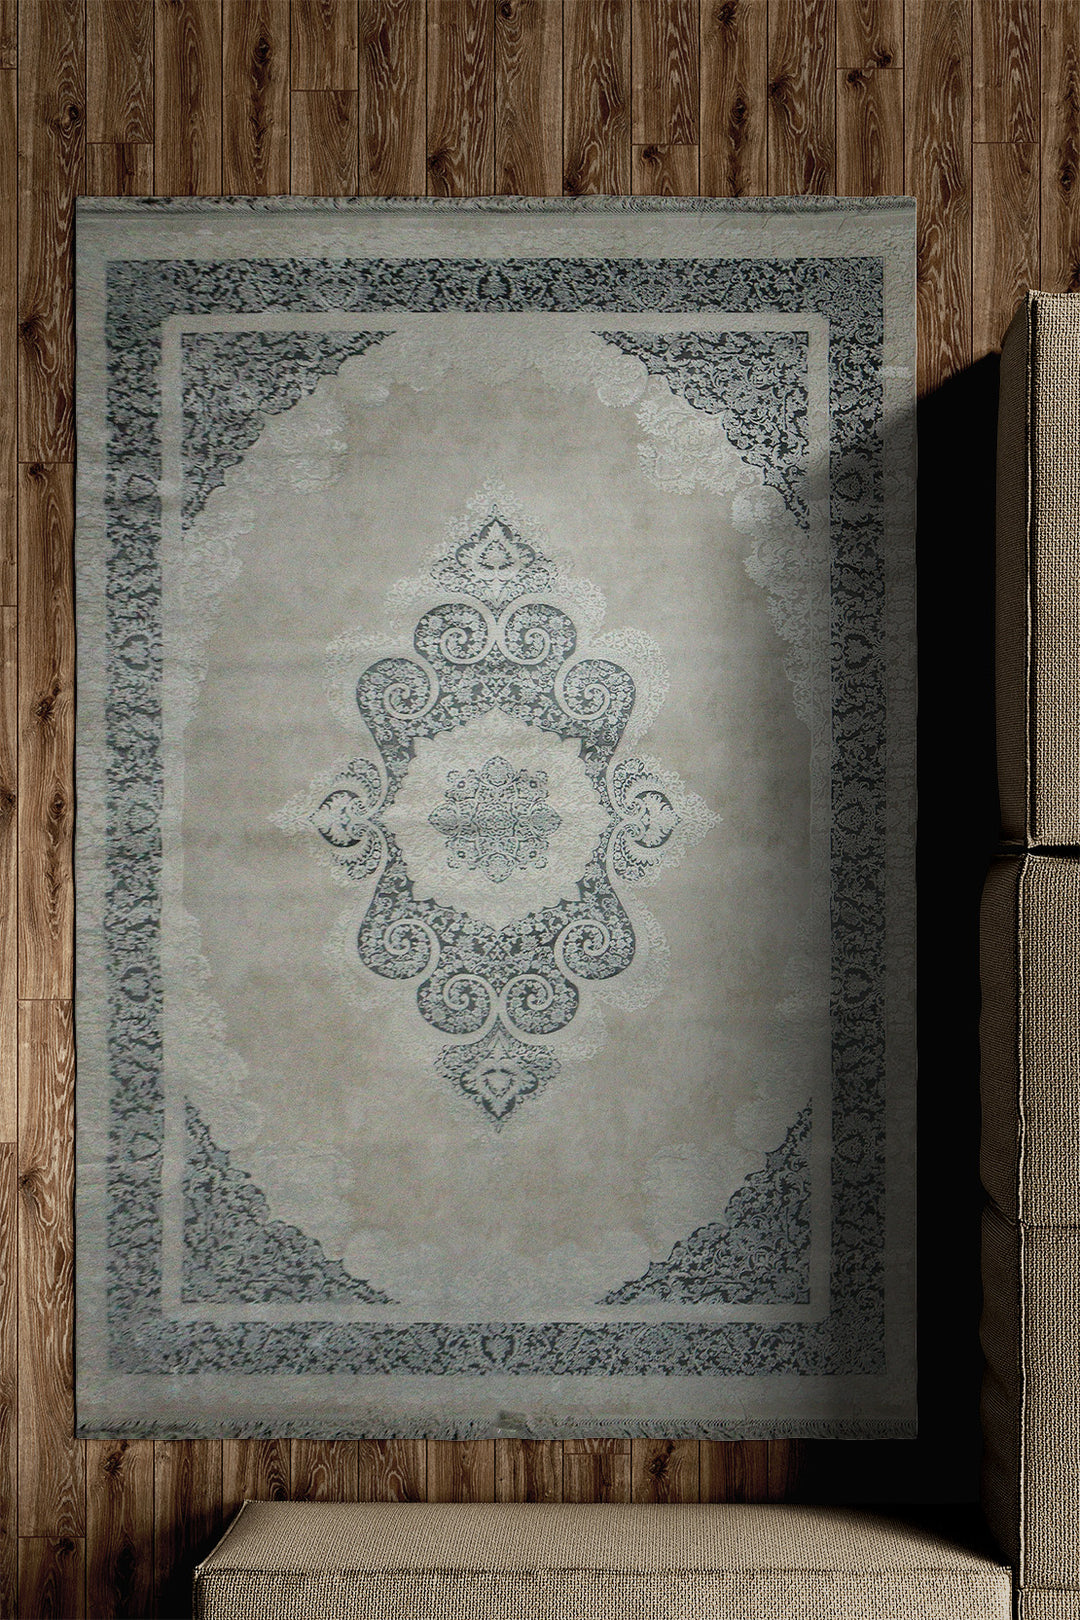 Turkish Premium Quality Voyage Rug - 5.2 x 7.5 FT - Beige - Resilient Construction for Long-Lasting Use